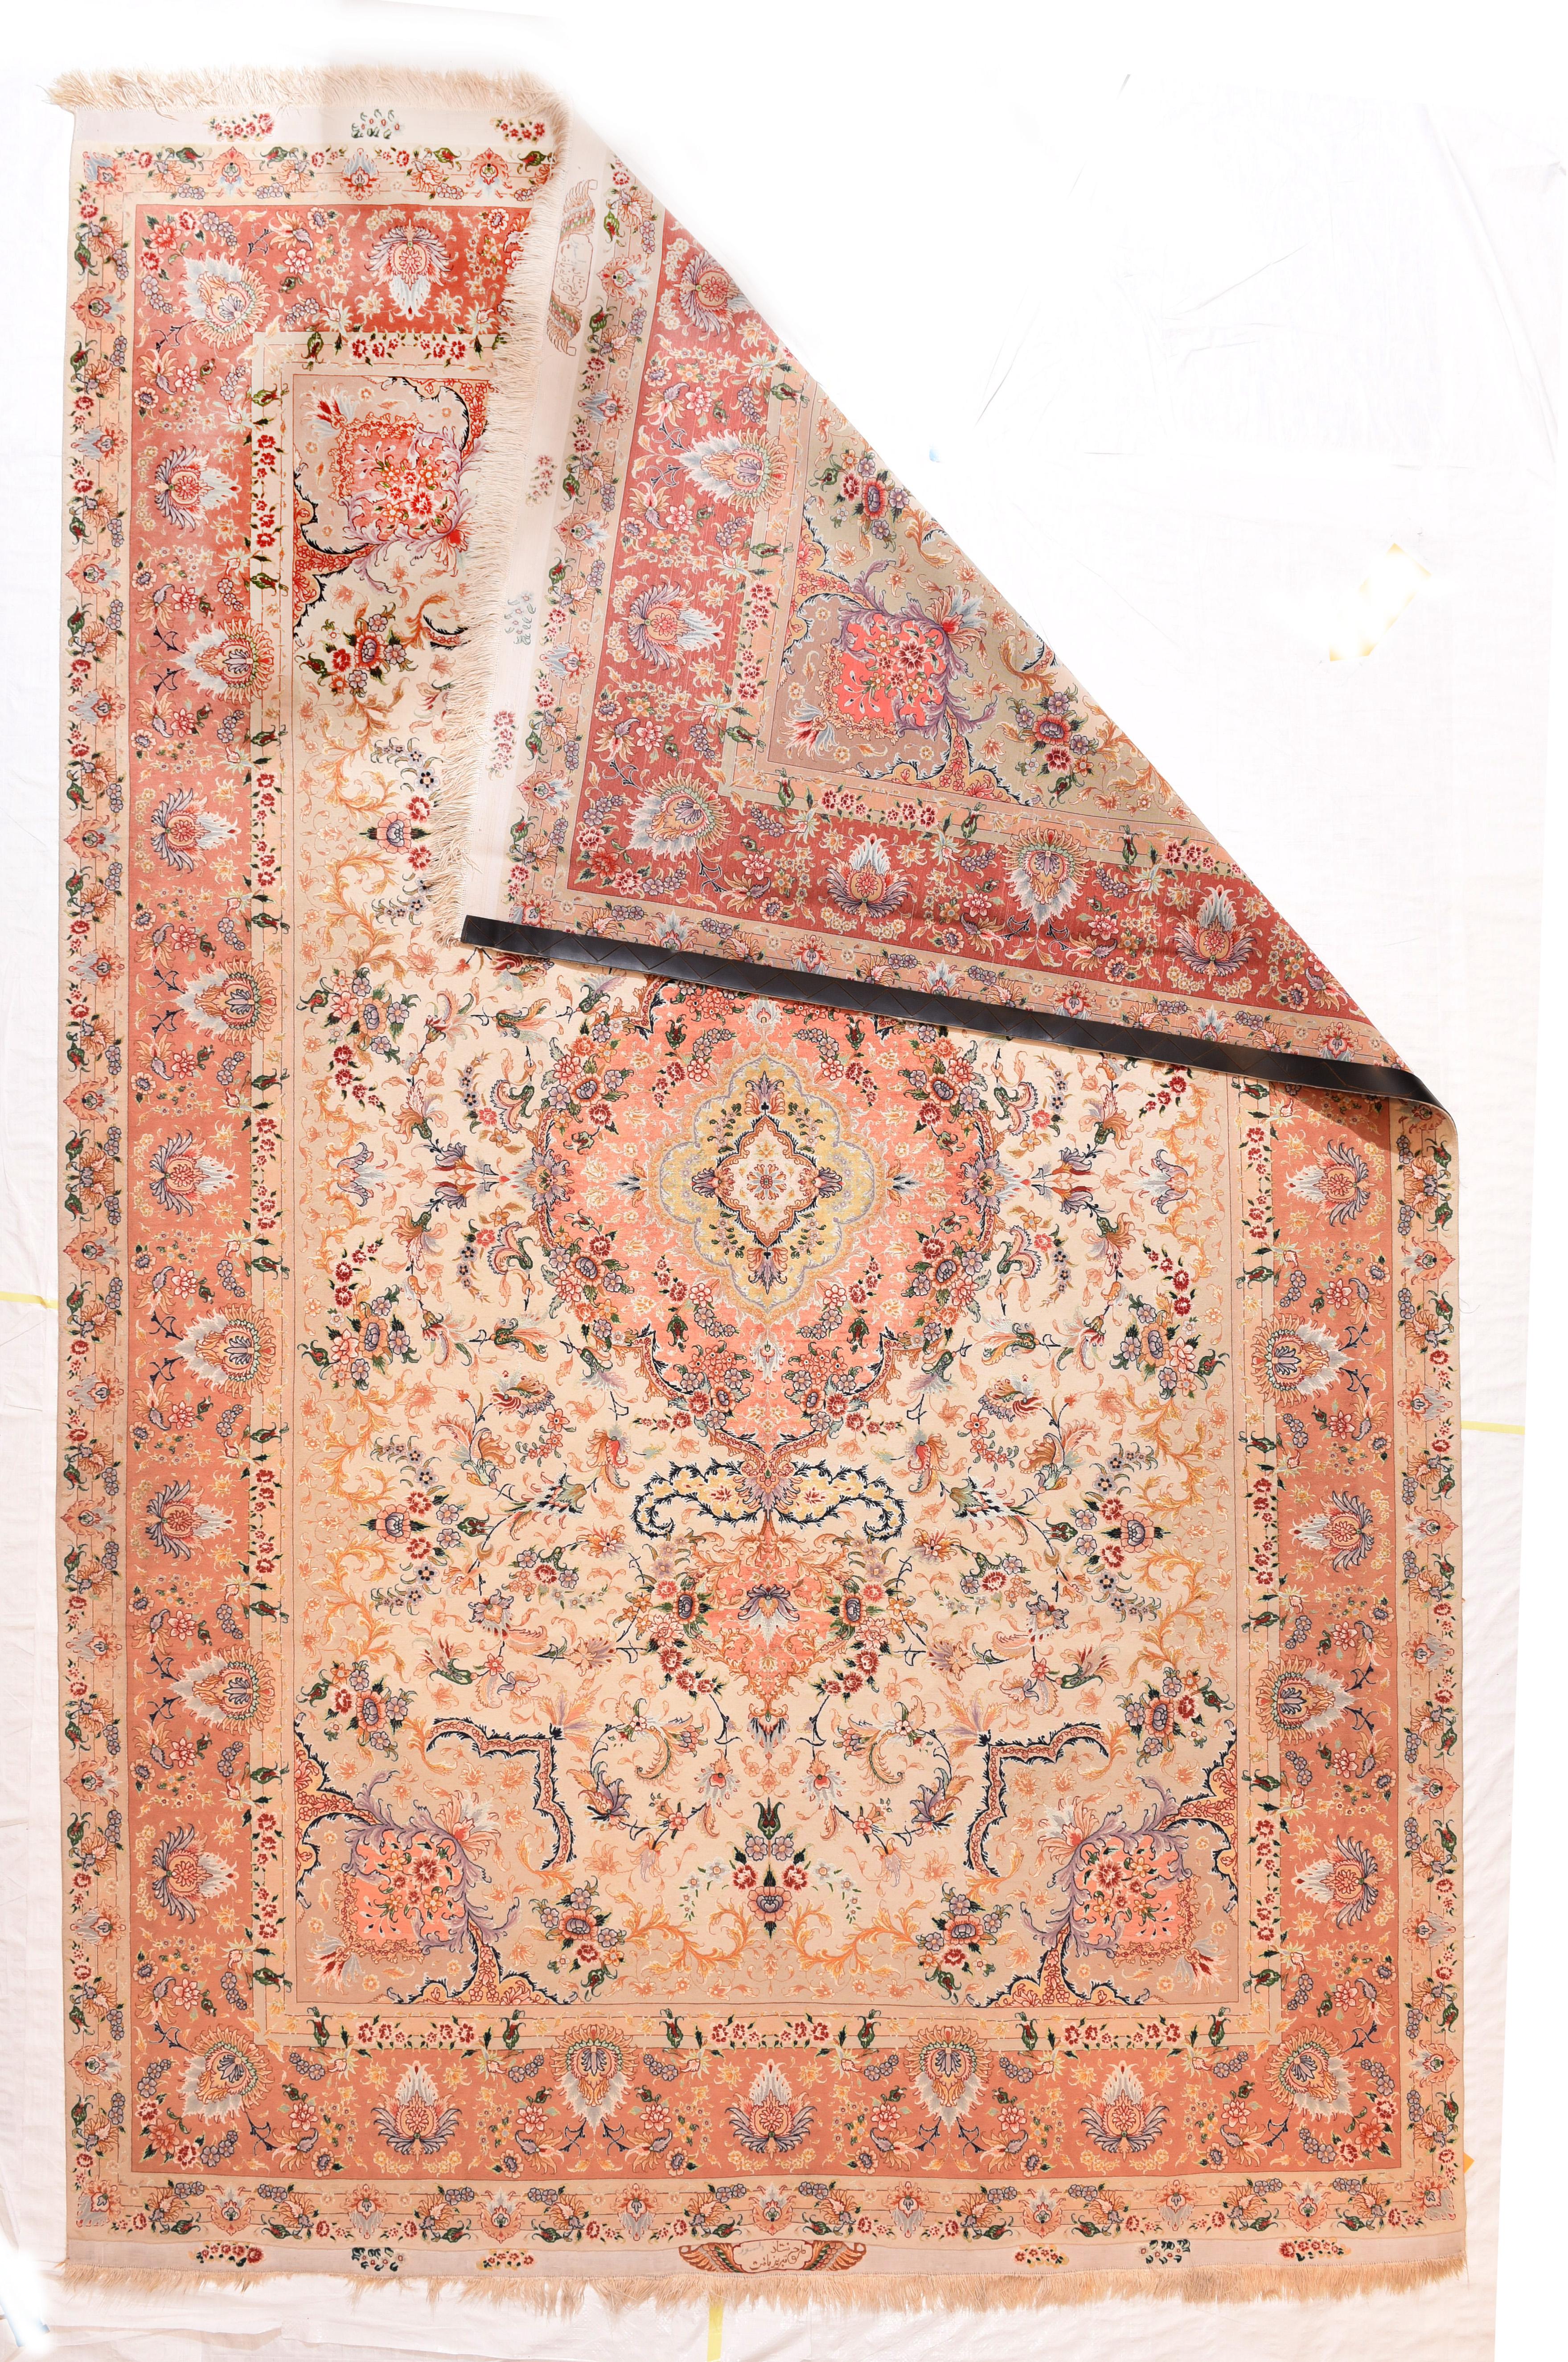 Vintage Tabriz Rug 6'7'' x 10'2''. Elaboration knows no bounds on this very finely woven, NW Persian urban carpet with an eggshell Sub-field hosting myriads of racemes, vinery segments, palmettes and botehs. The artistically nested oval medallion